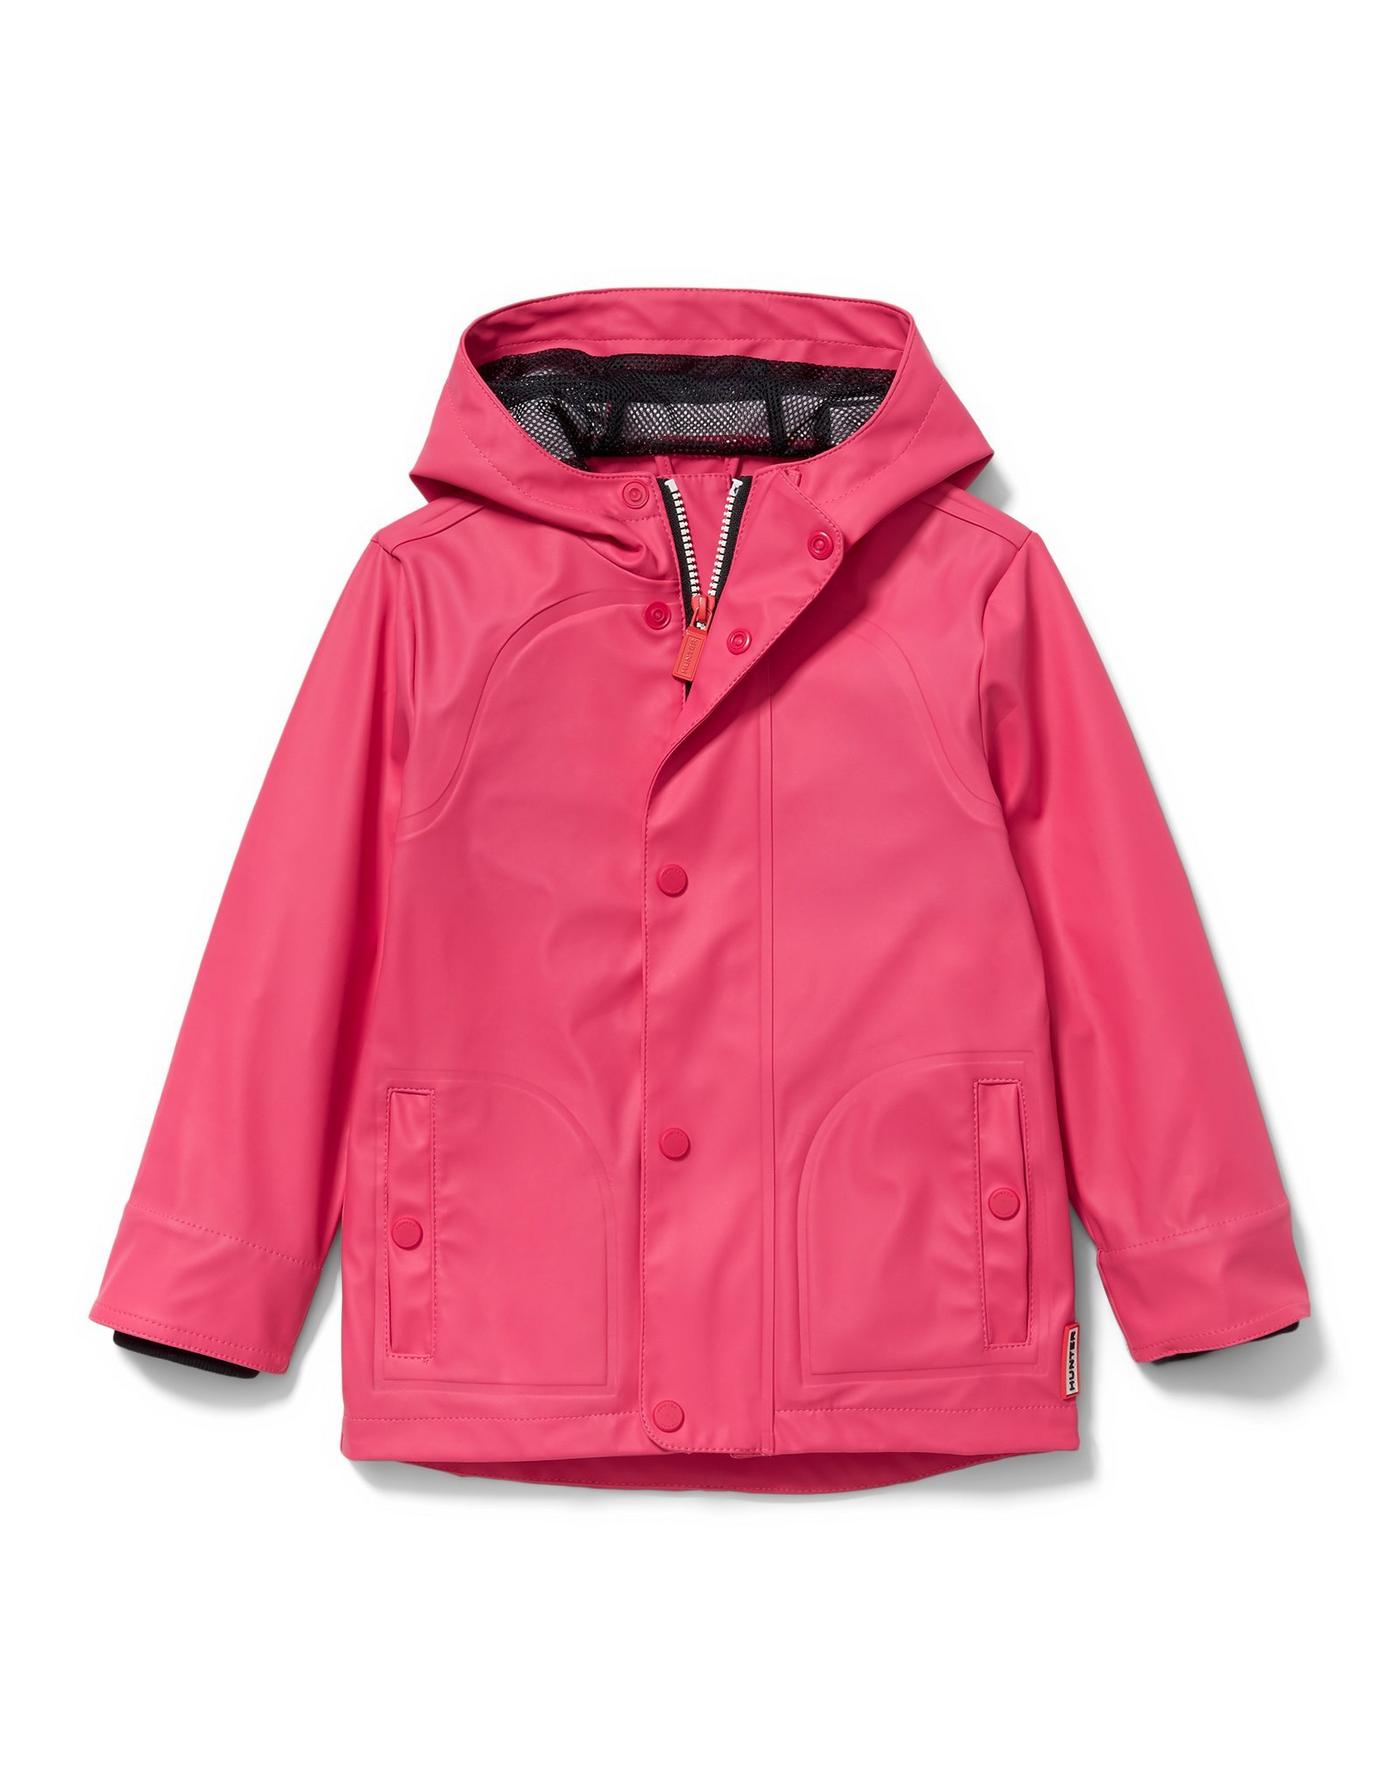 matching outerwear for siblings, kids raincoat